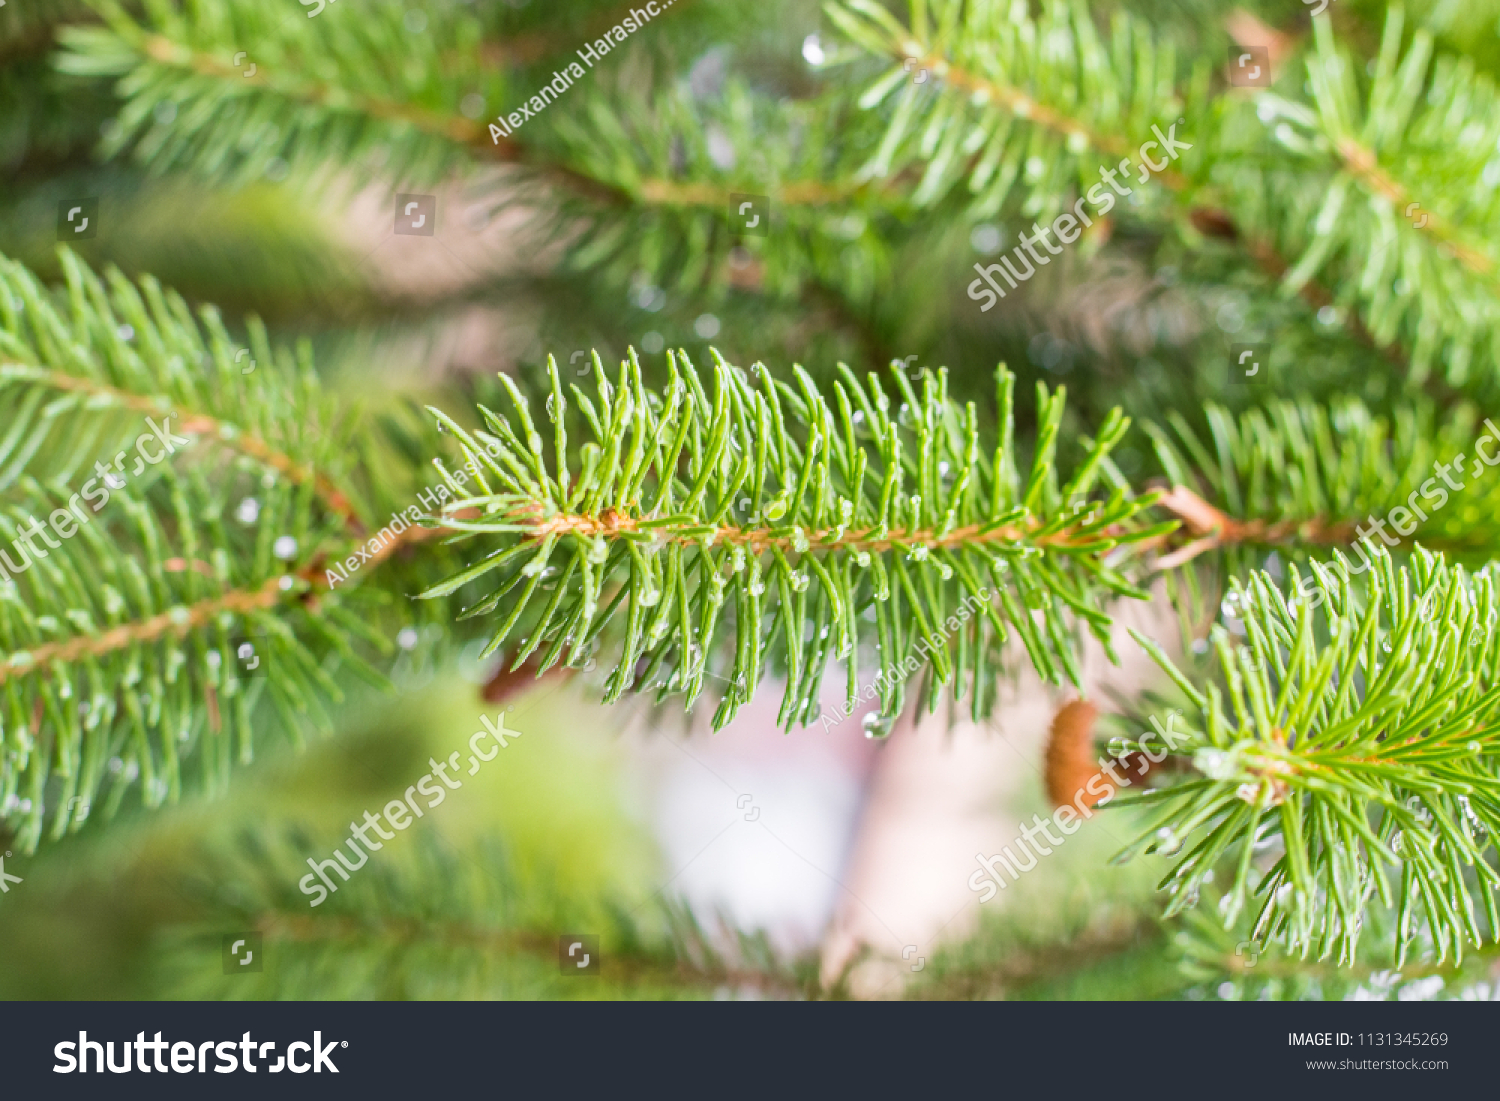 Pine branch on pine tree. Pine tree in pine forest. Wild nature. Greenery. Park. Outdoor photo. #1131345269